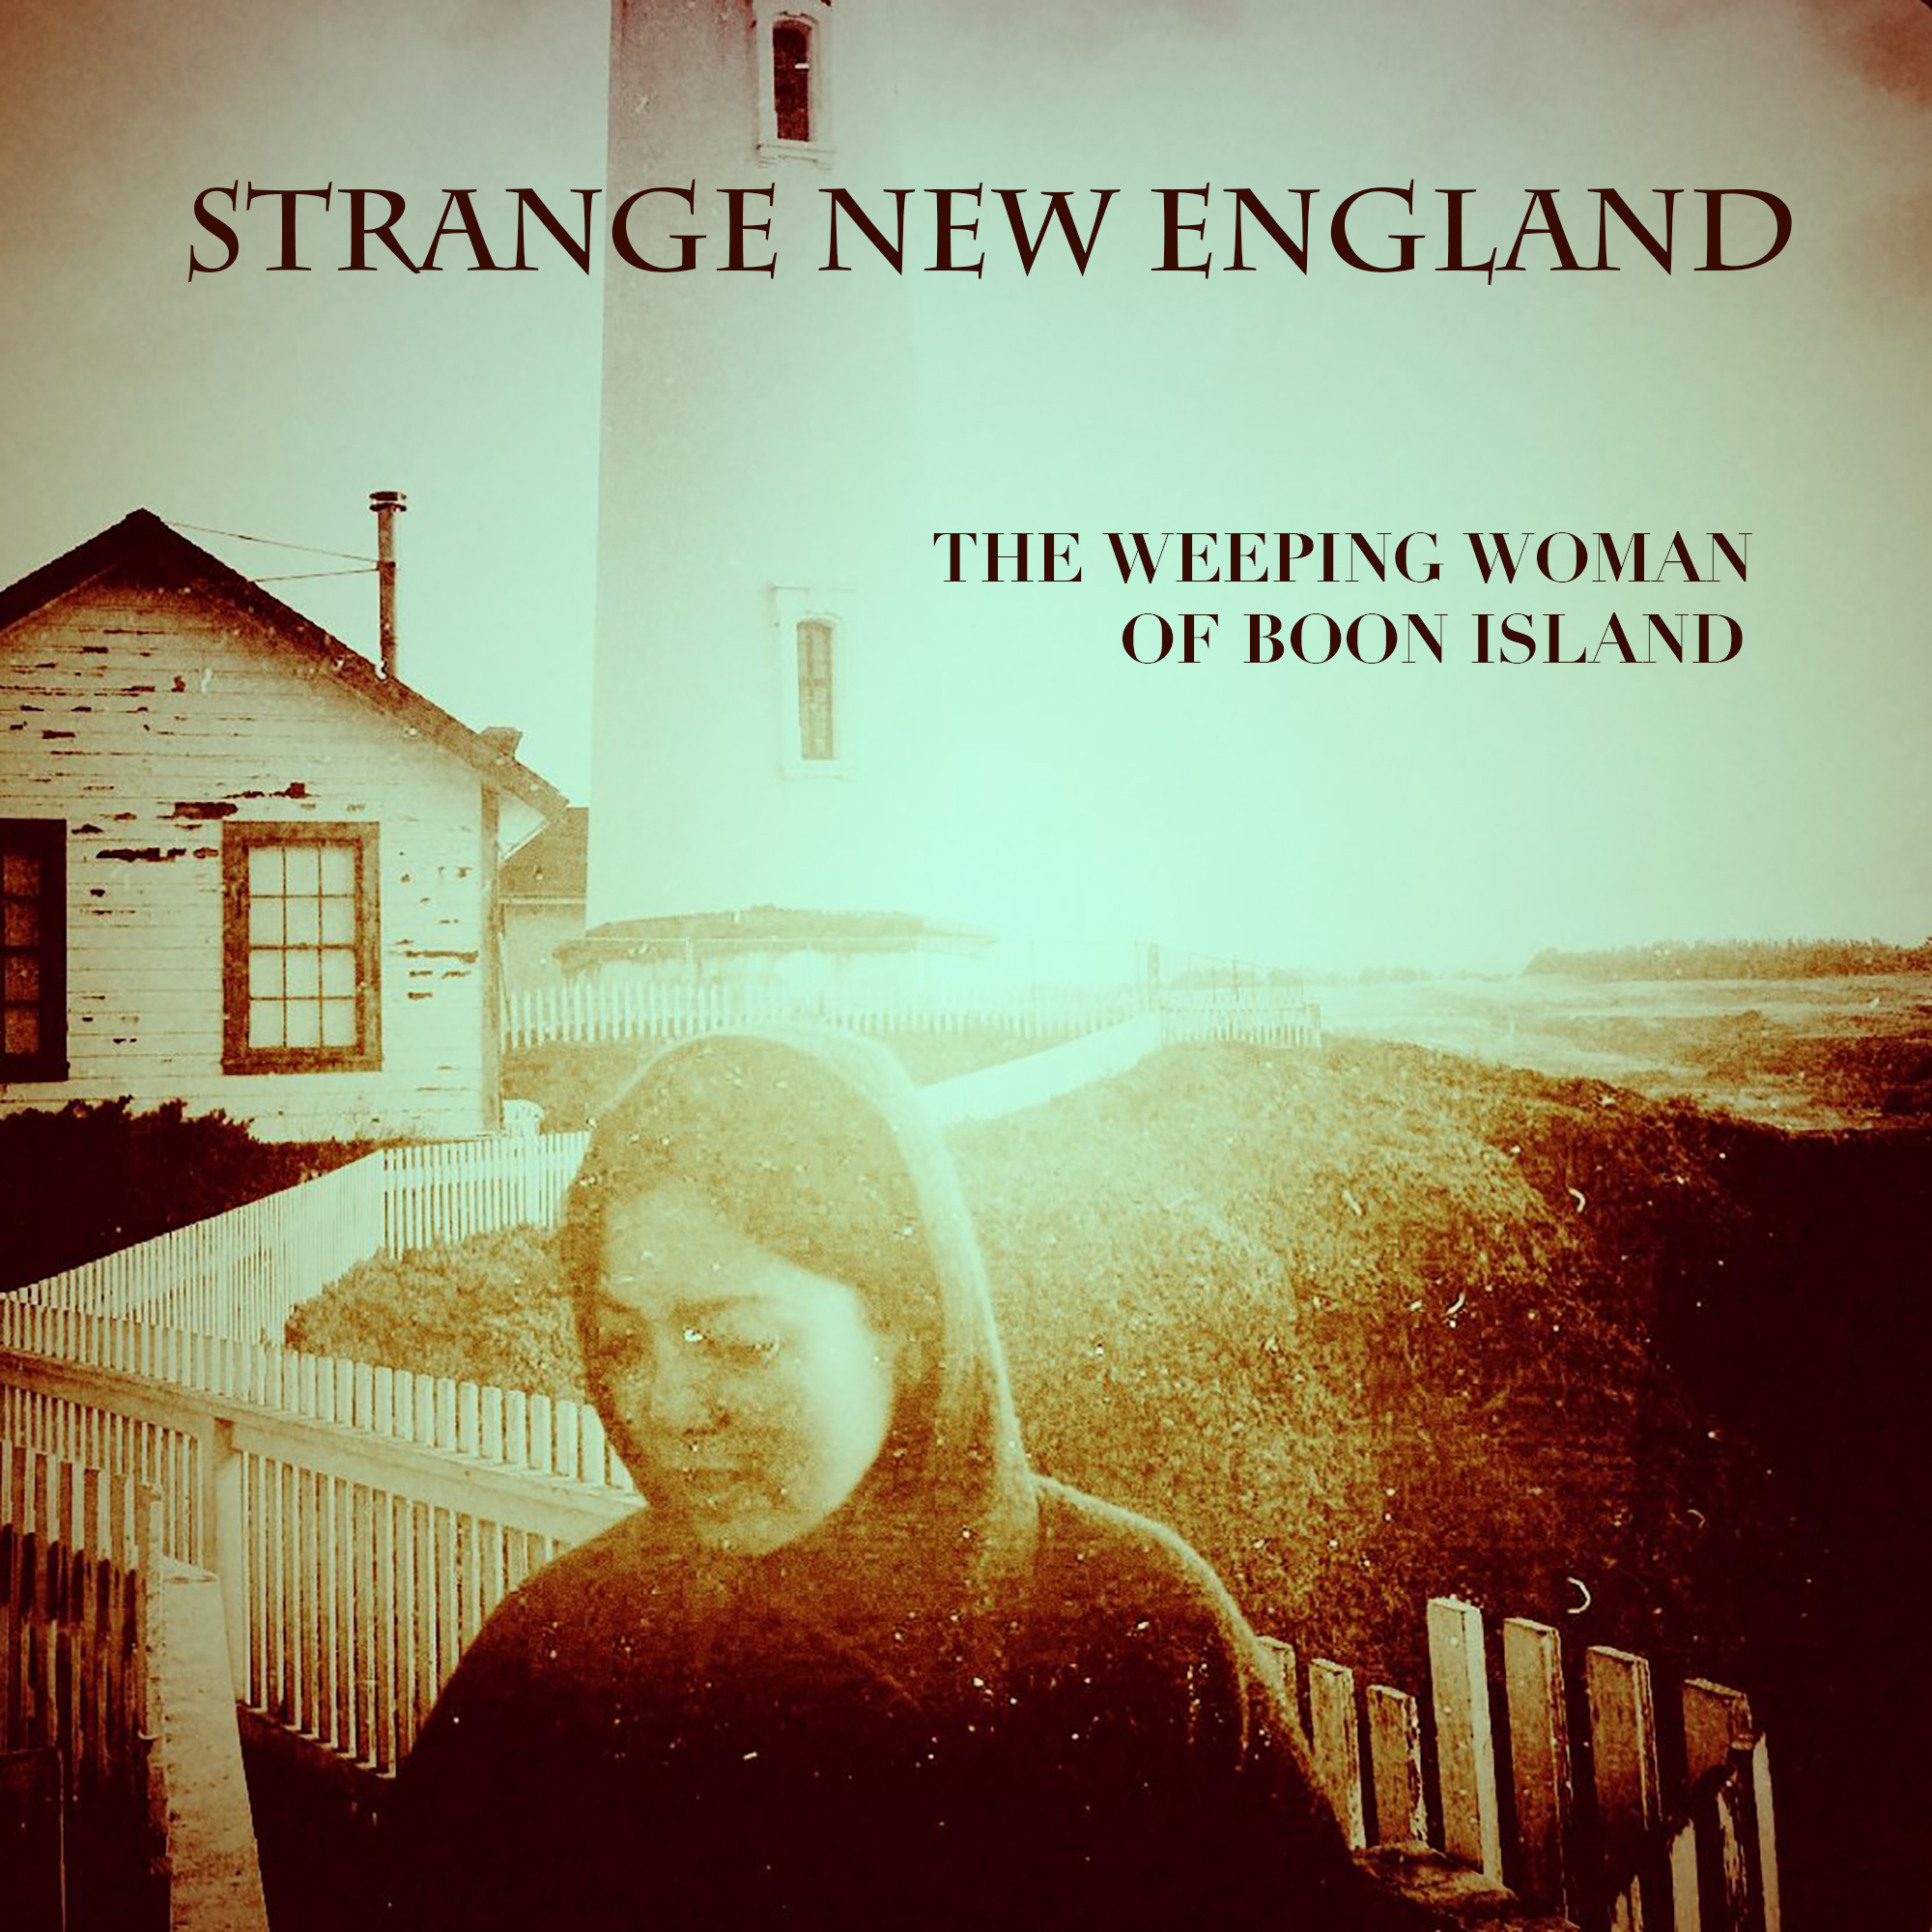 The Weeping Woman of Boon Island